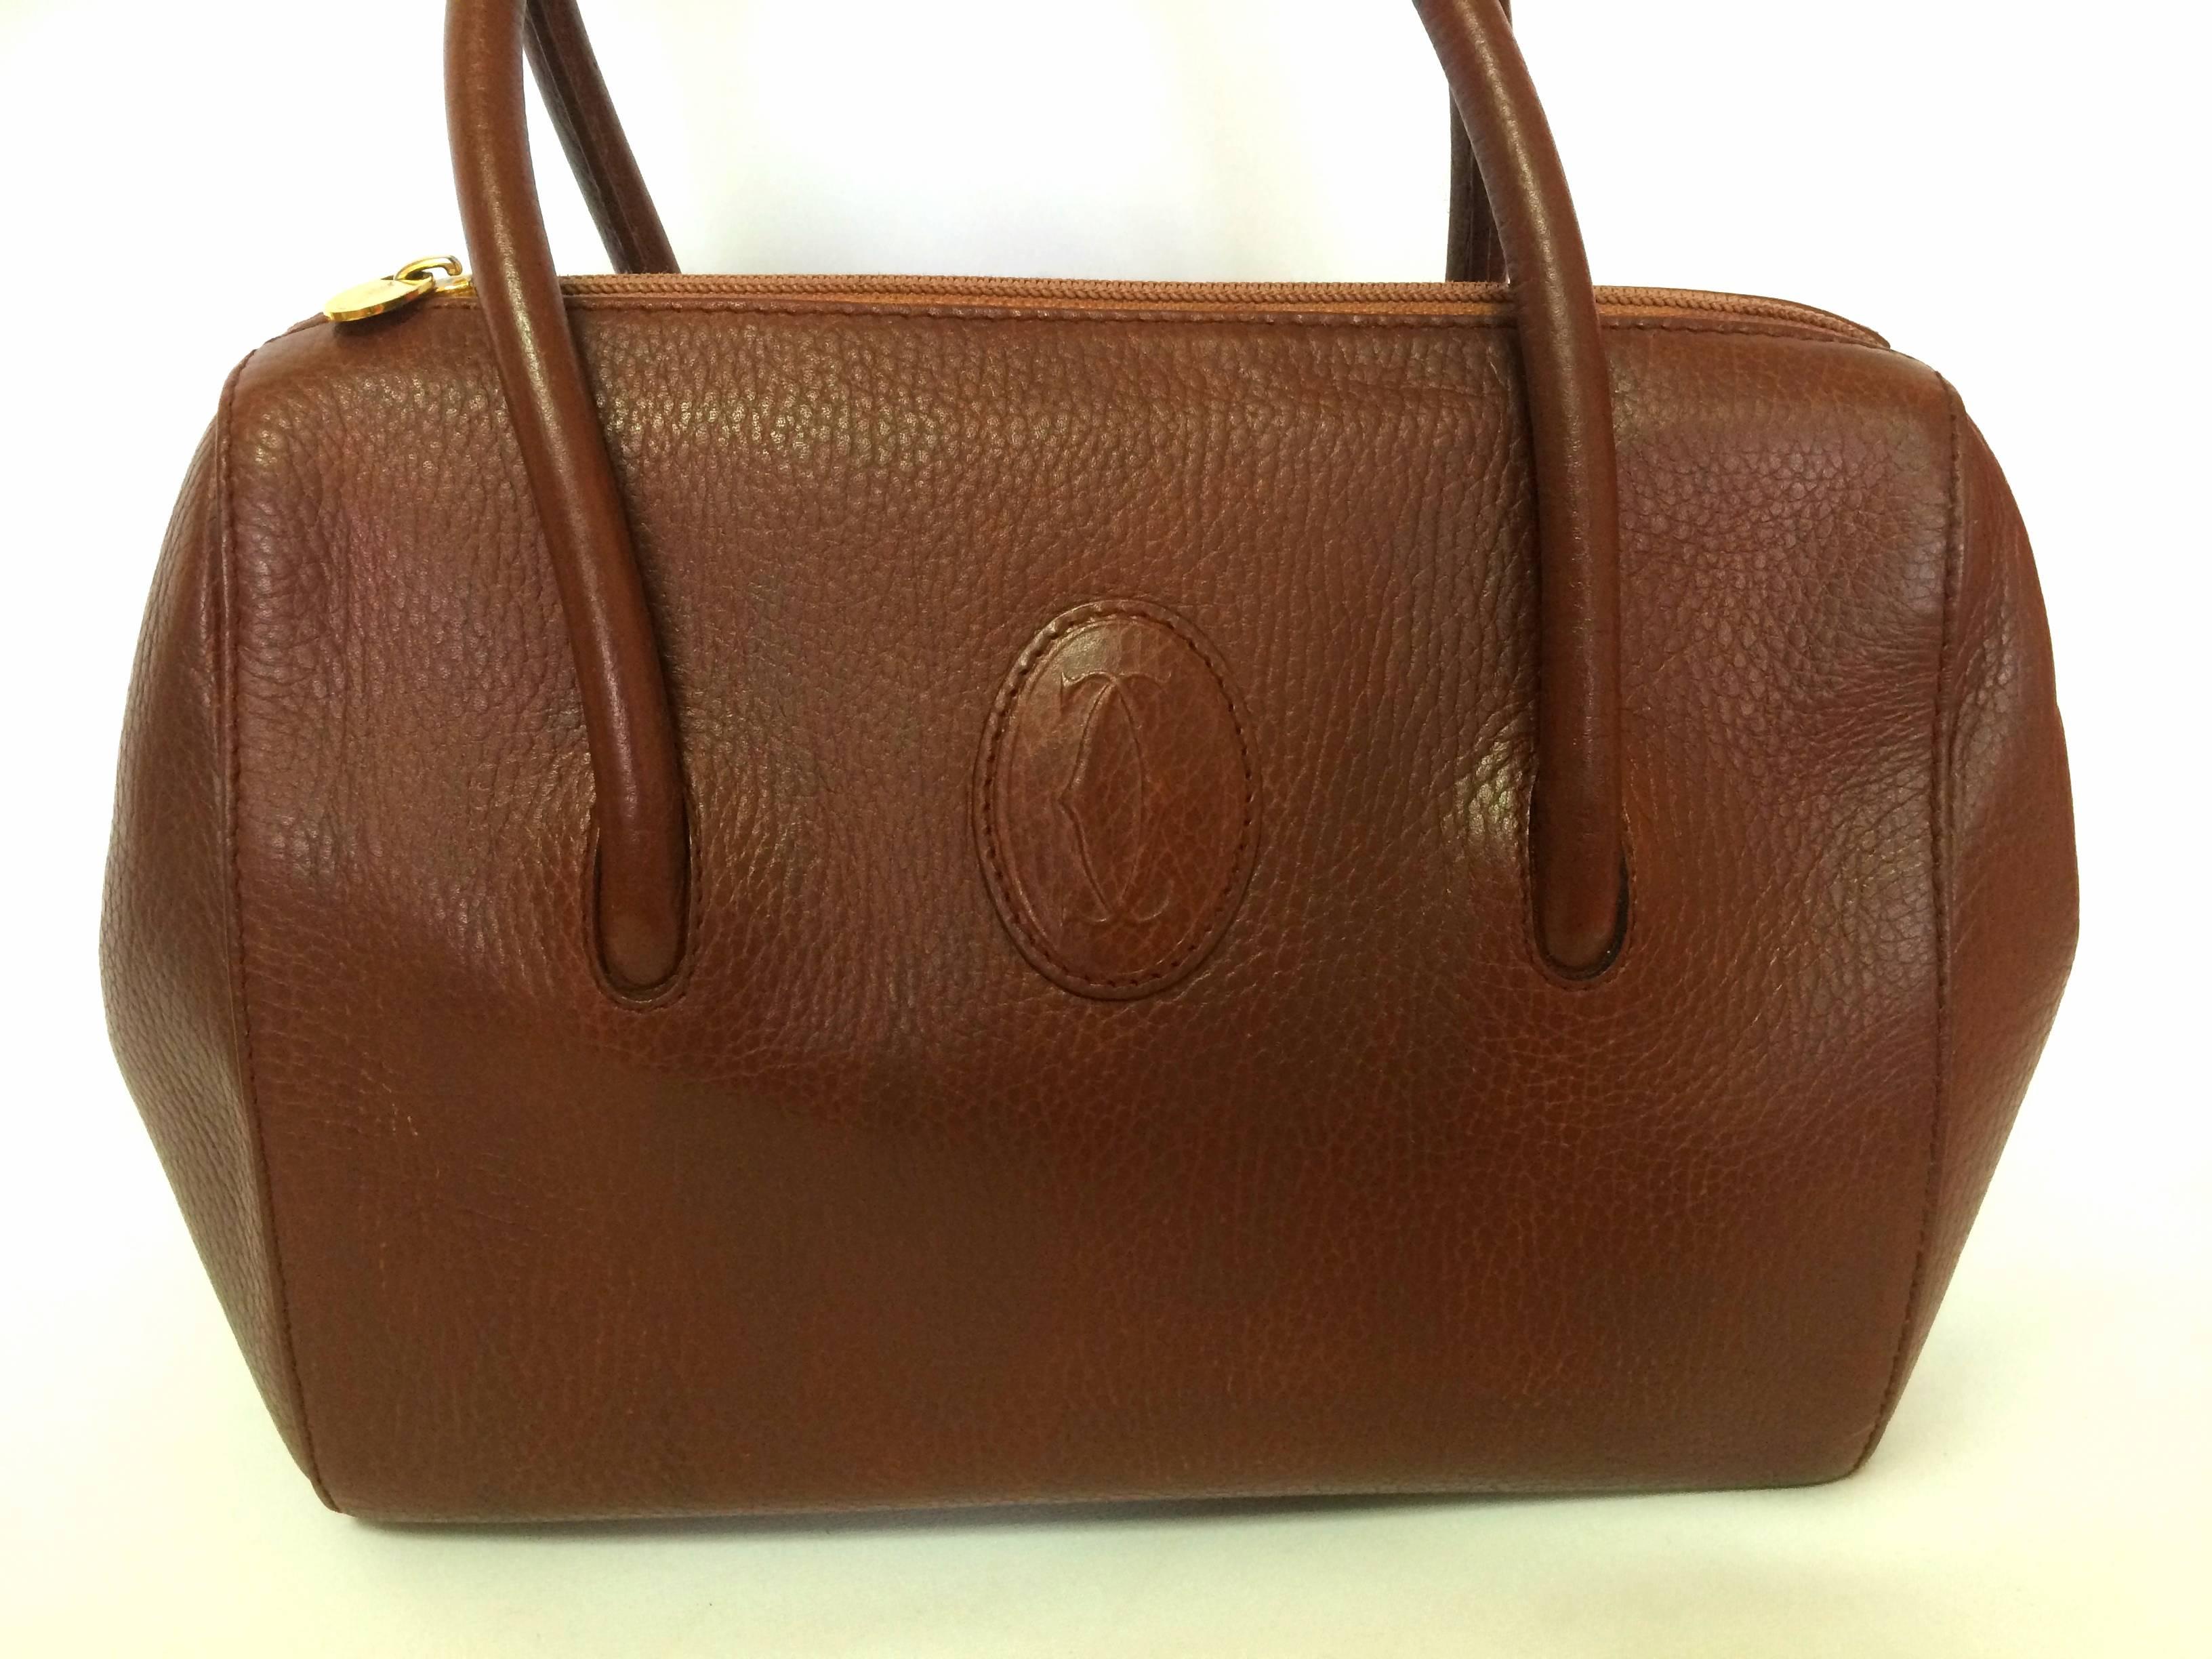 1990s. Vintage Cartier classic brown leather handbag with logo mark.  les must de Cartier collection.

Introducing a vintage brown leather handbag from Cartier, les must de Cartier collection back in the old era. Rare piece from the